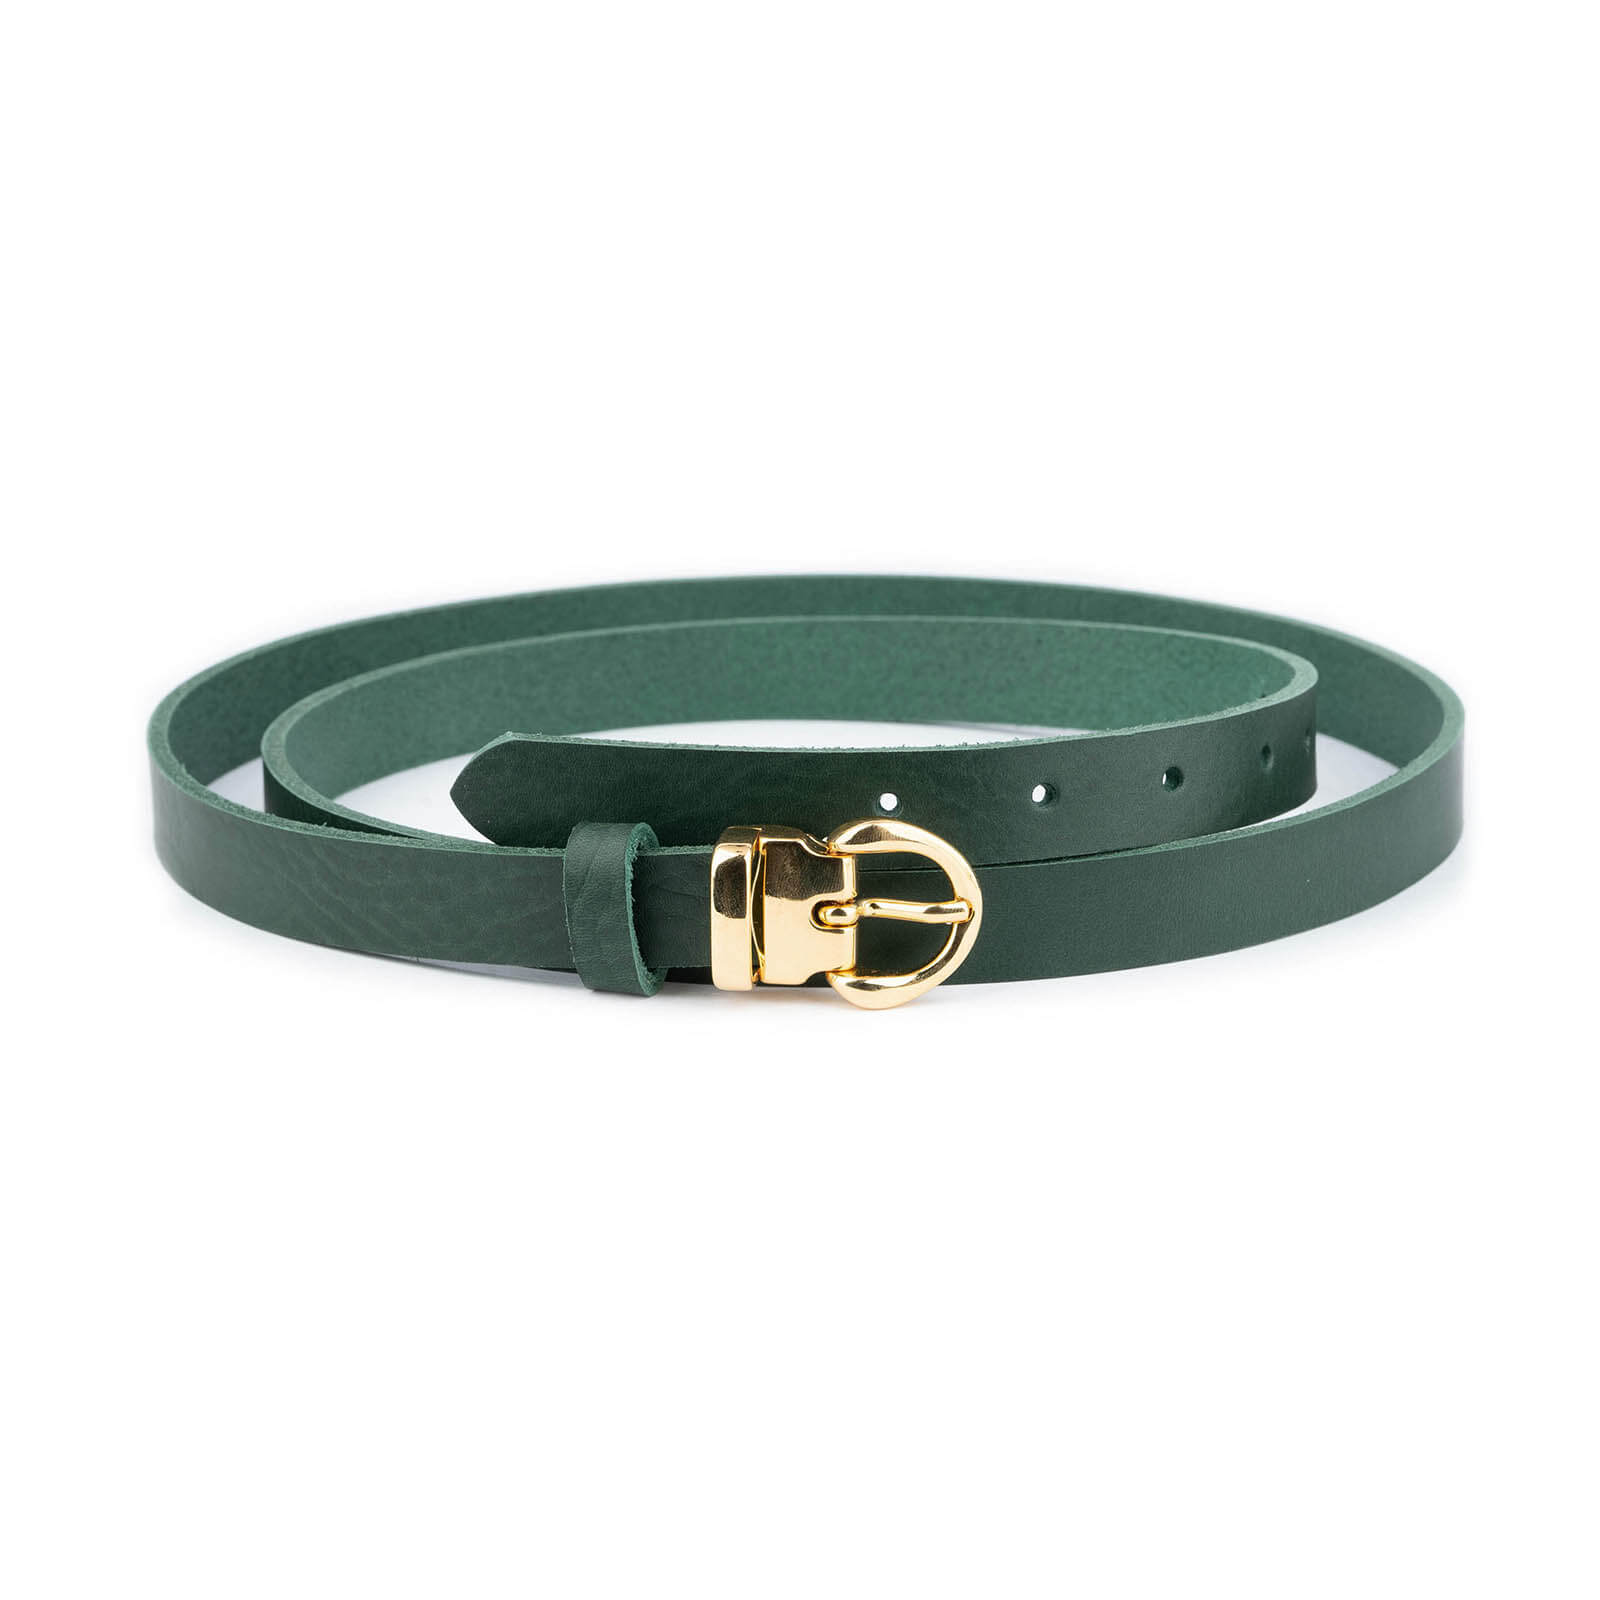 Buy Ladies Forest Green Leather Belt With Gold Buckle Thin 2.0 Cm 